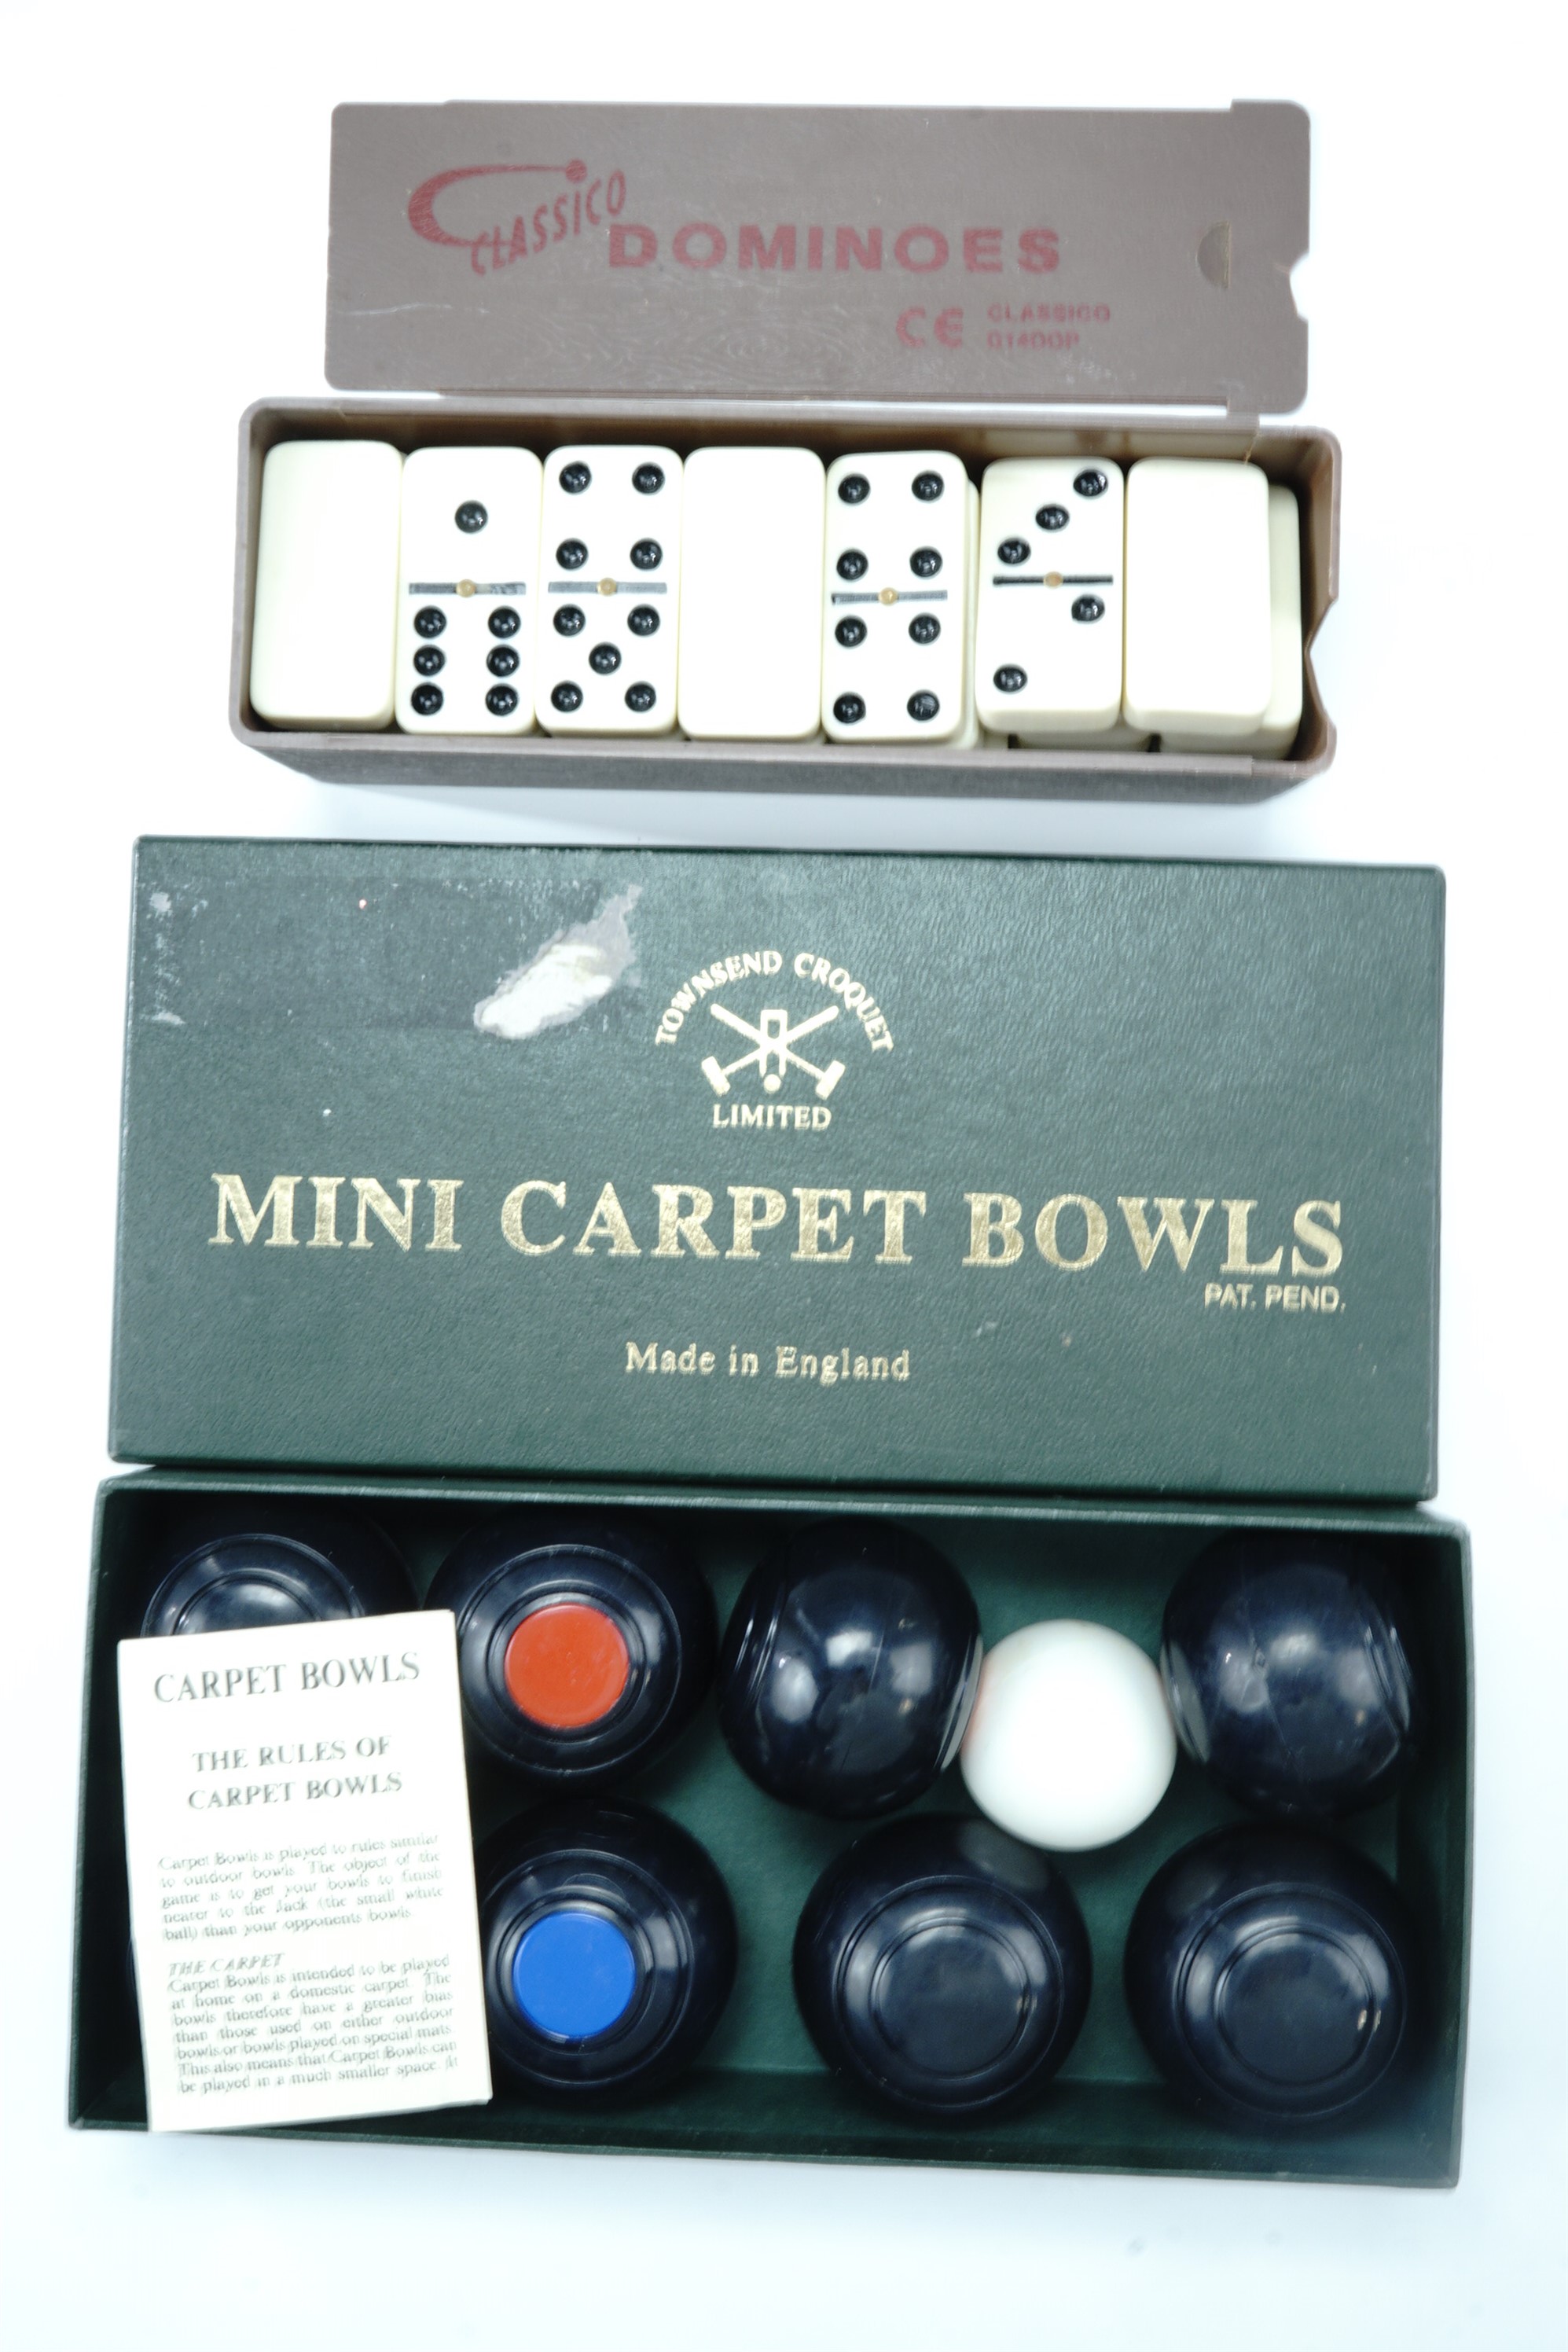 Miniature carpet bowls together with Classico dominoes